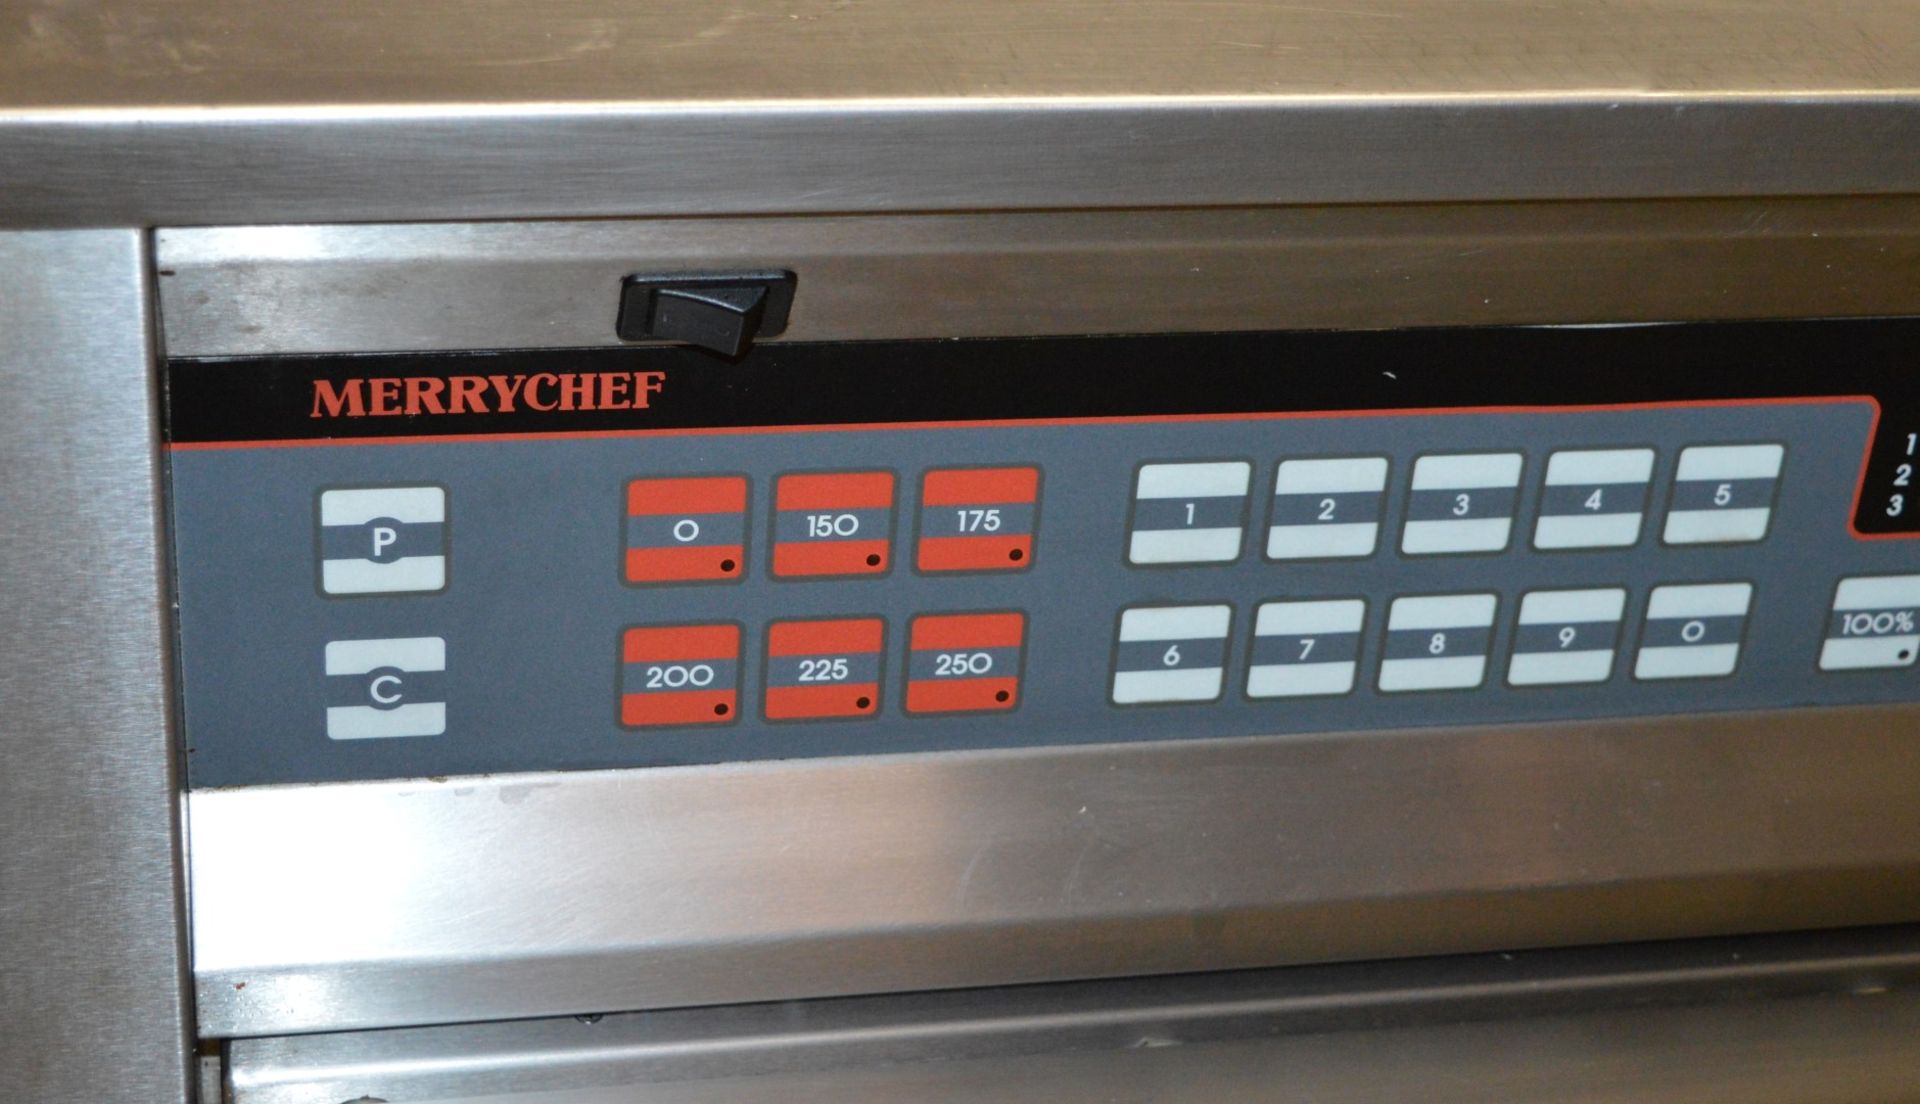 1 x MerryChef Mealstream Series 5 Microwave Oven - Stainless Steel Finish - CL232 - Ref JP244 - - Image 2 of 9